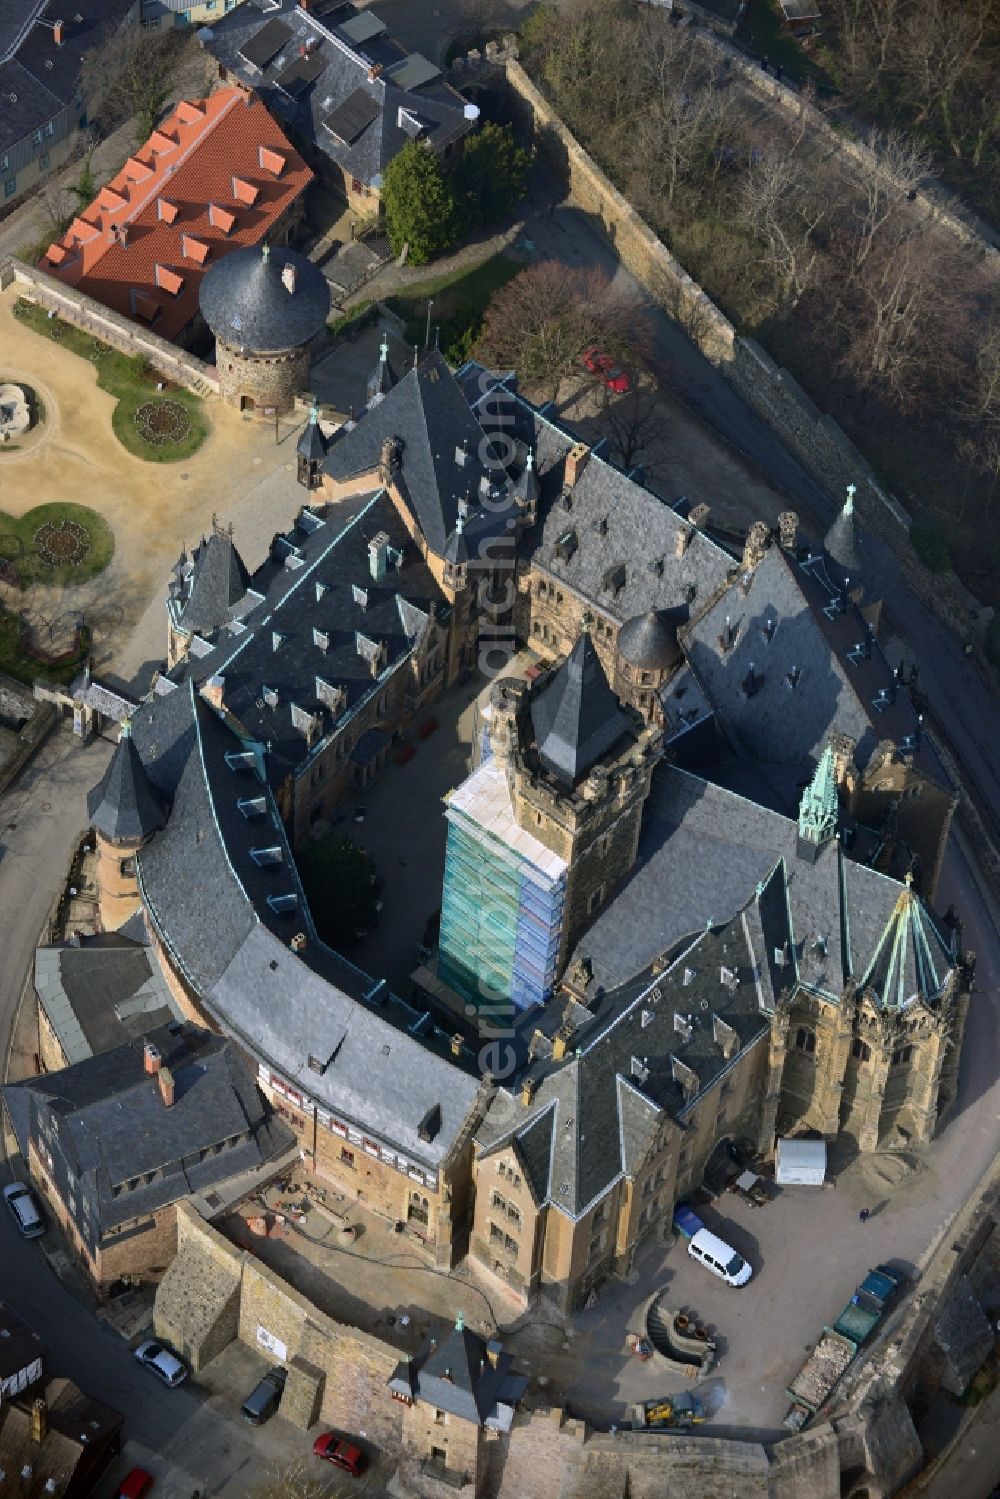 Aerial photograph Wernigerode - View of the Wernigerode Castle in Wernigerode in the state Saxony-Anhalt. The Wernigerode Castle is located in the Harz mountains. Today it houses a popular museum